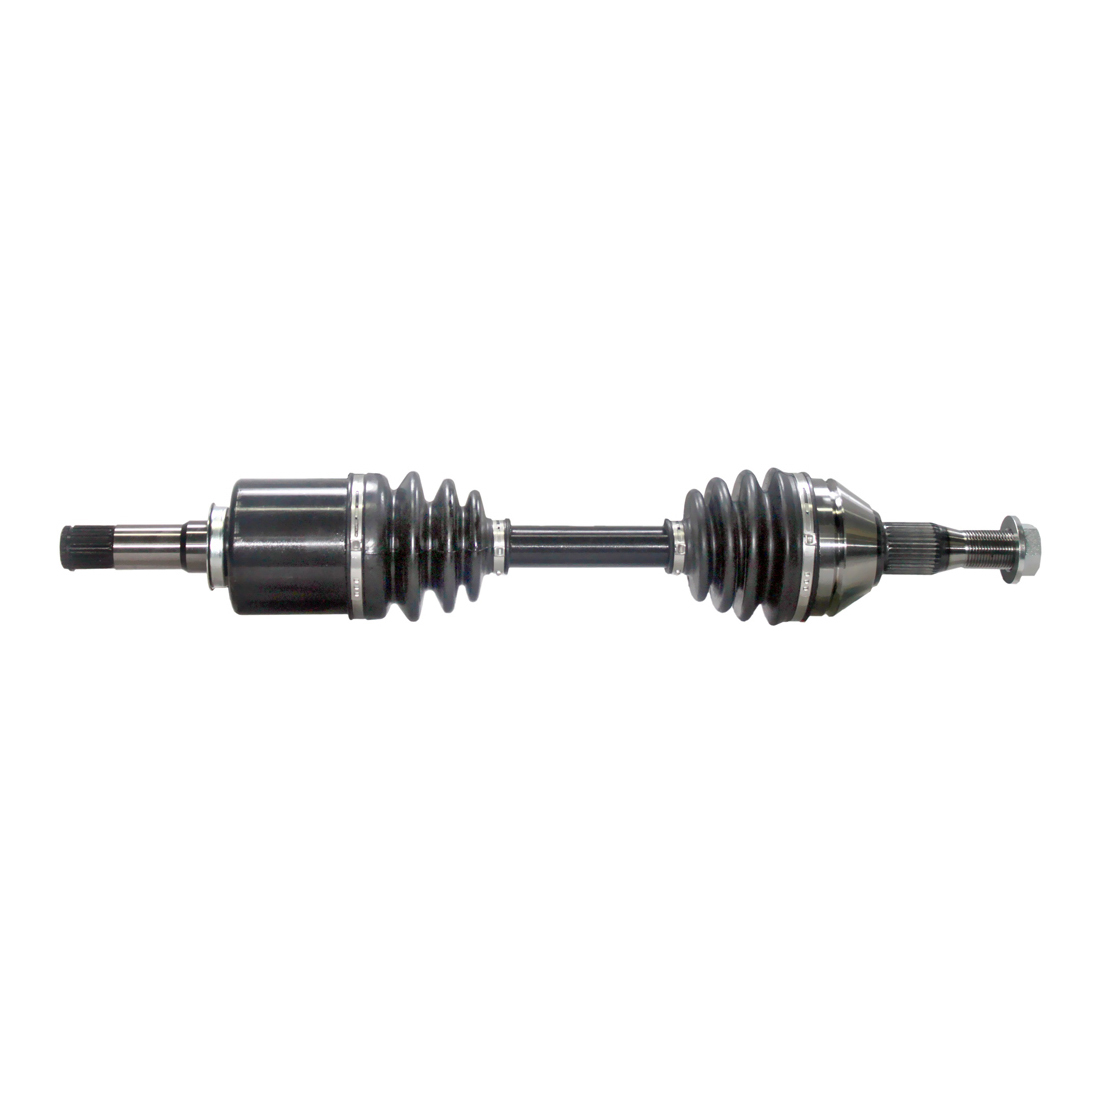  Chevrolet Impala Limited Drive Axle Front 